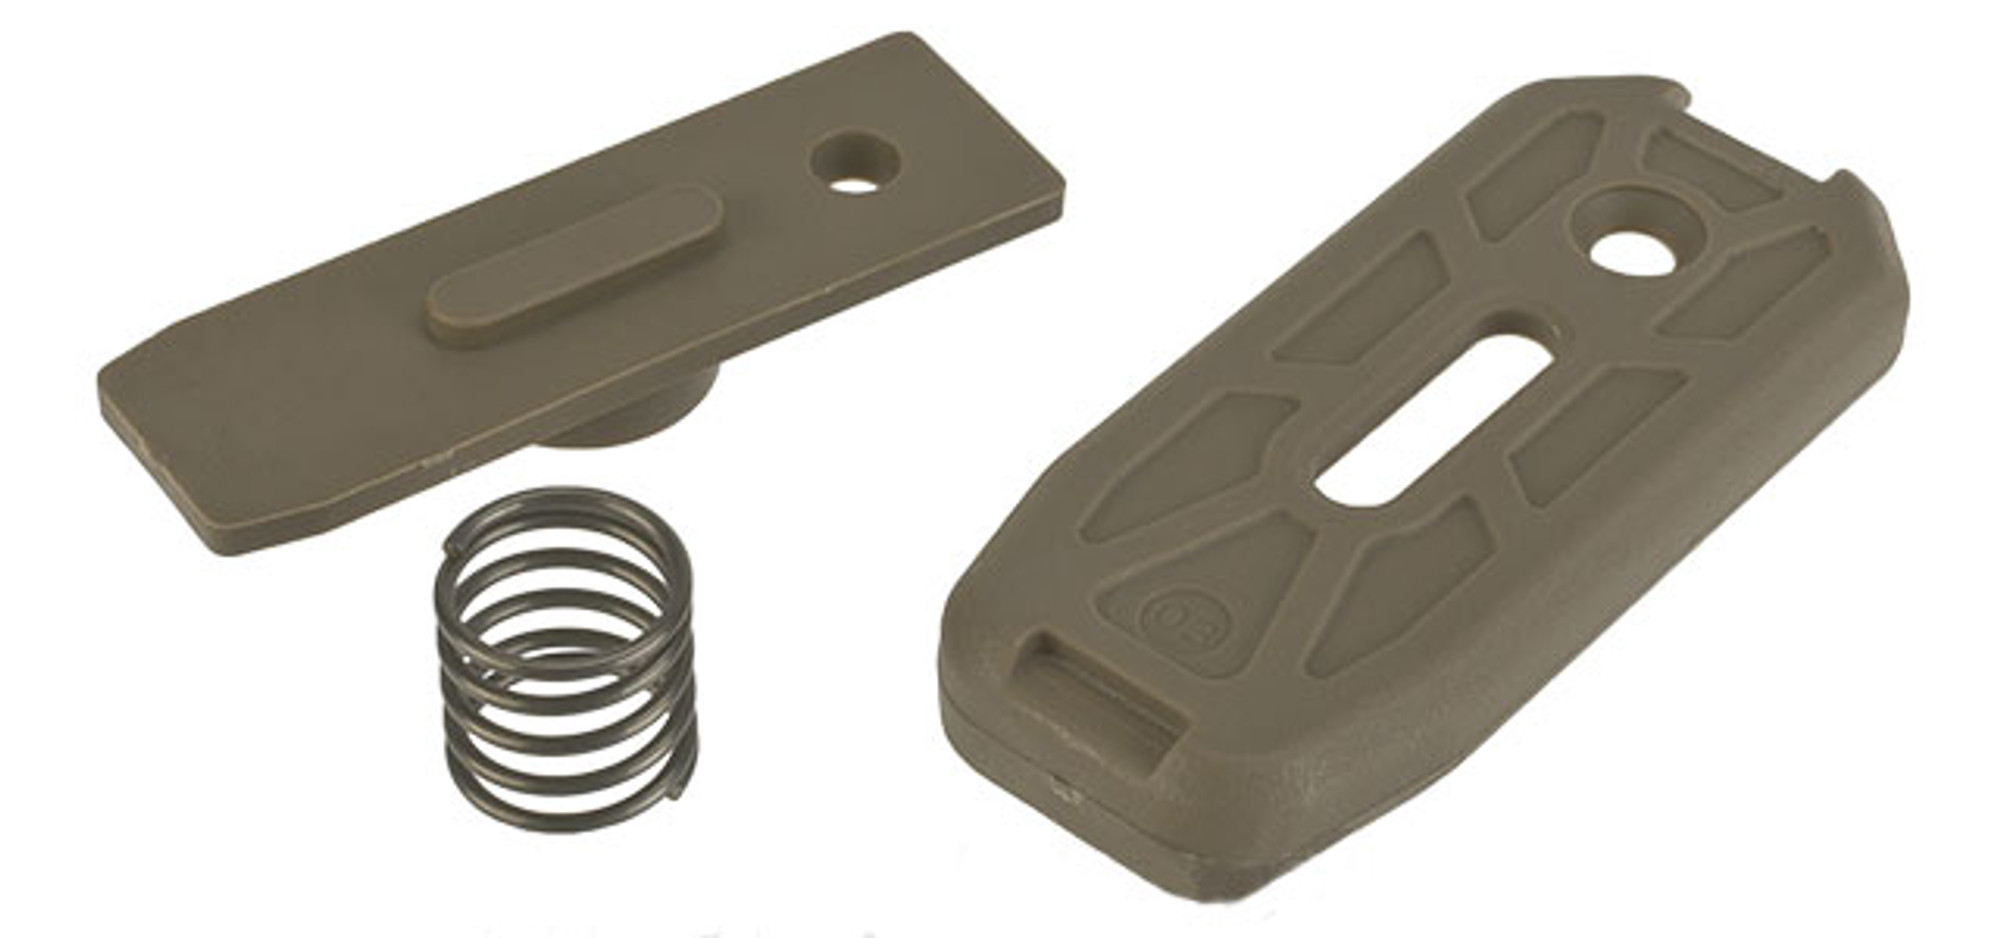 WE-Tech Replacement Magazine Plate for MSK  M4  M16 Series Airsoft GBB Rifles - Part# 137  138  139 (Tan)